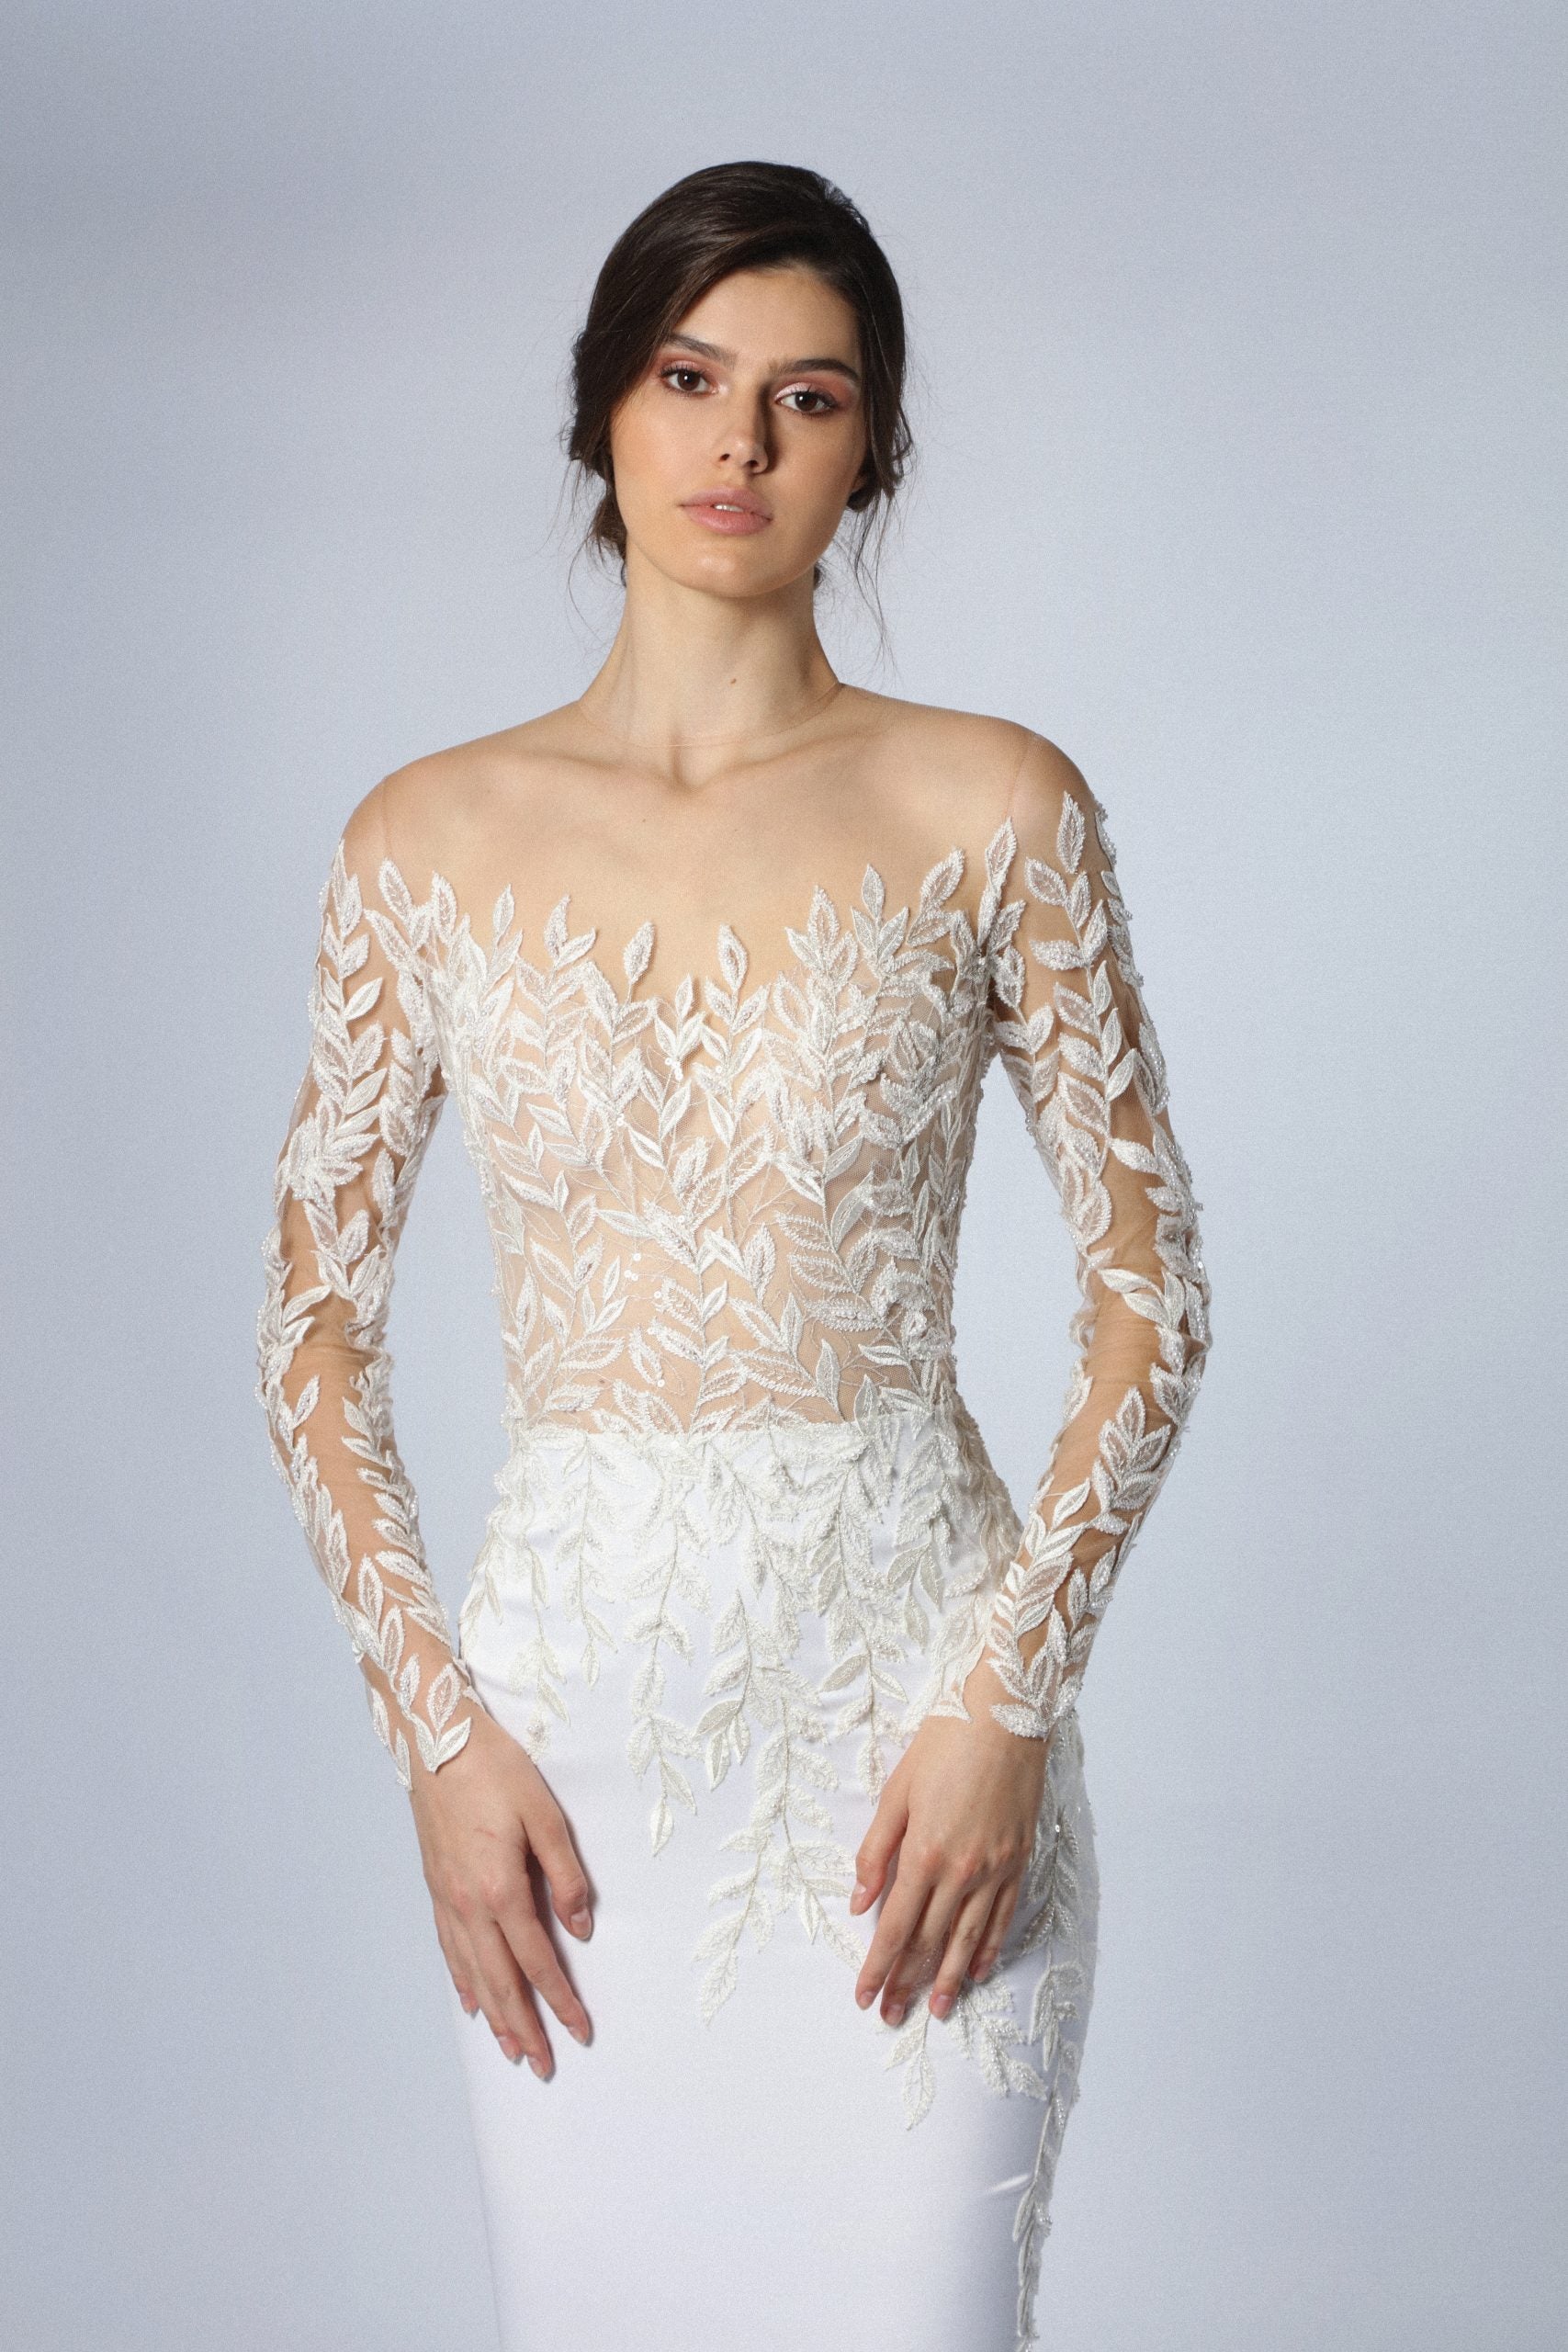 Illusion Long Sleeve Fit-And-Flare Gown by Tony Ward - Image 2